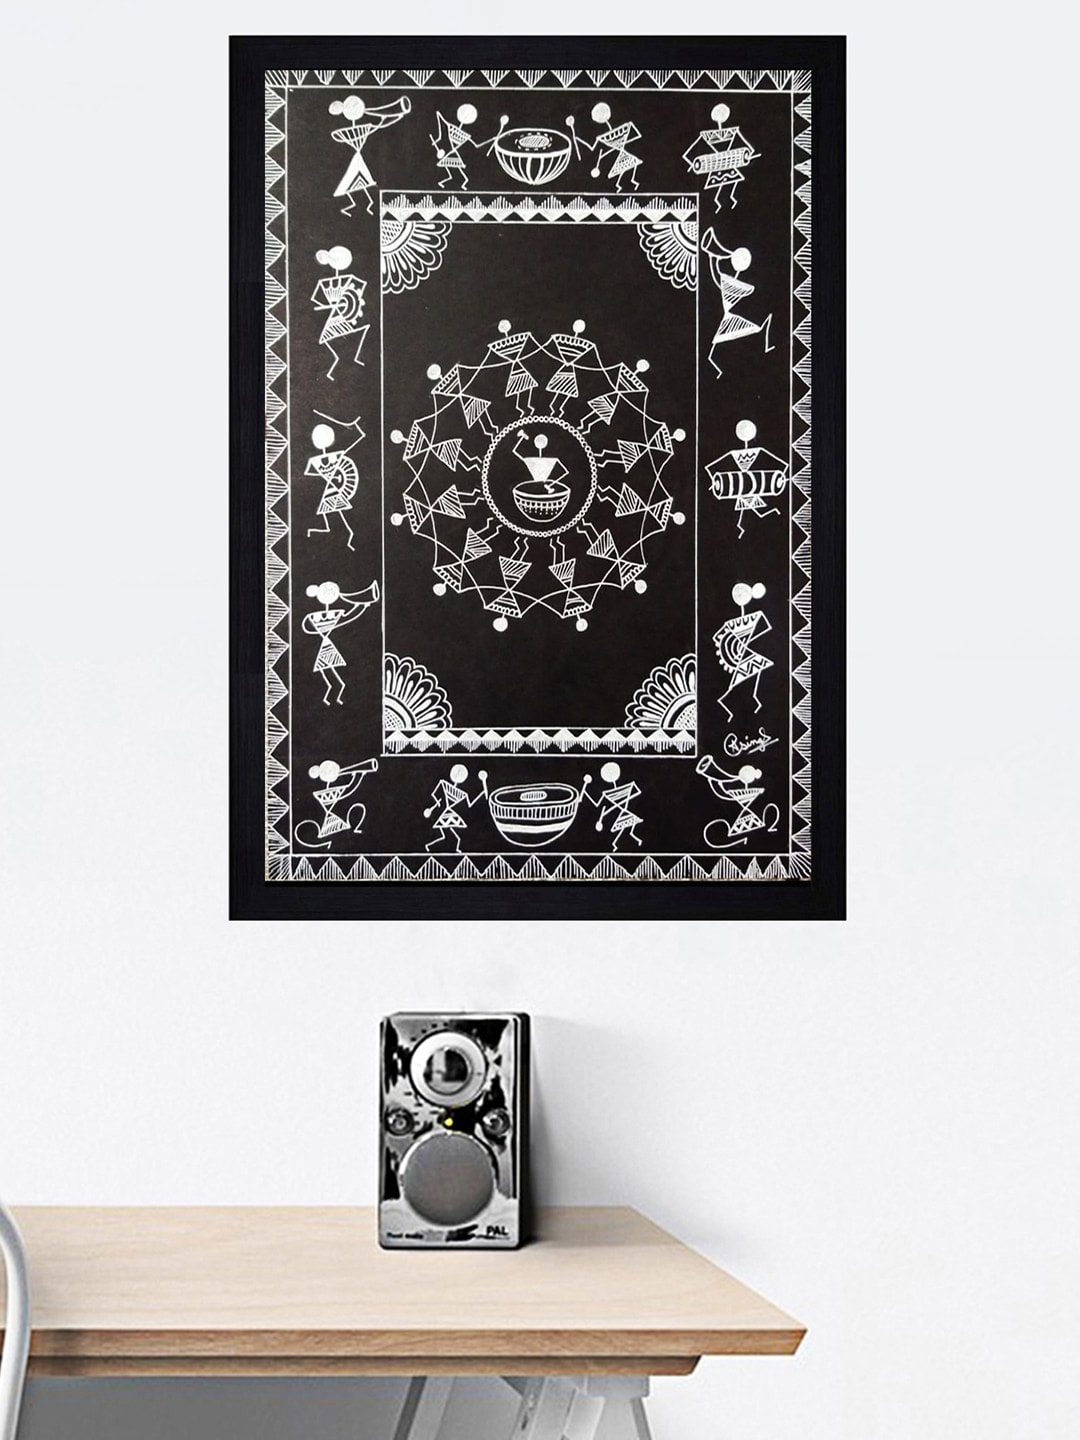 Gallery99 Black & White Warli Art Framed Wall Painting Price in India